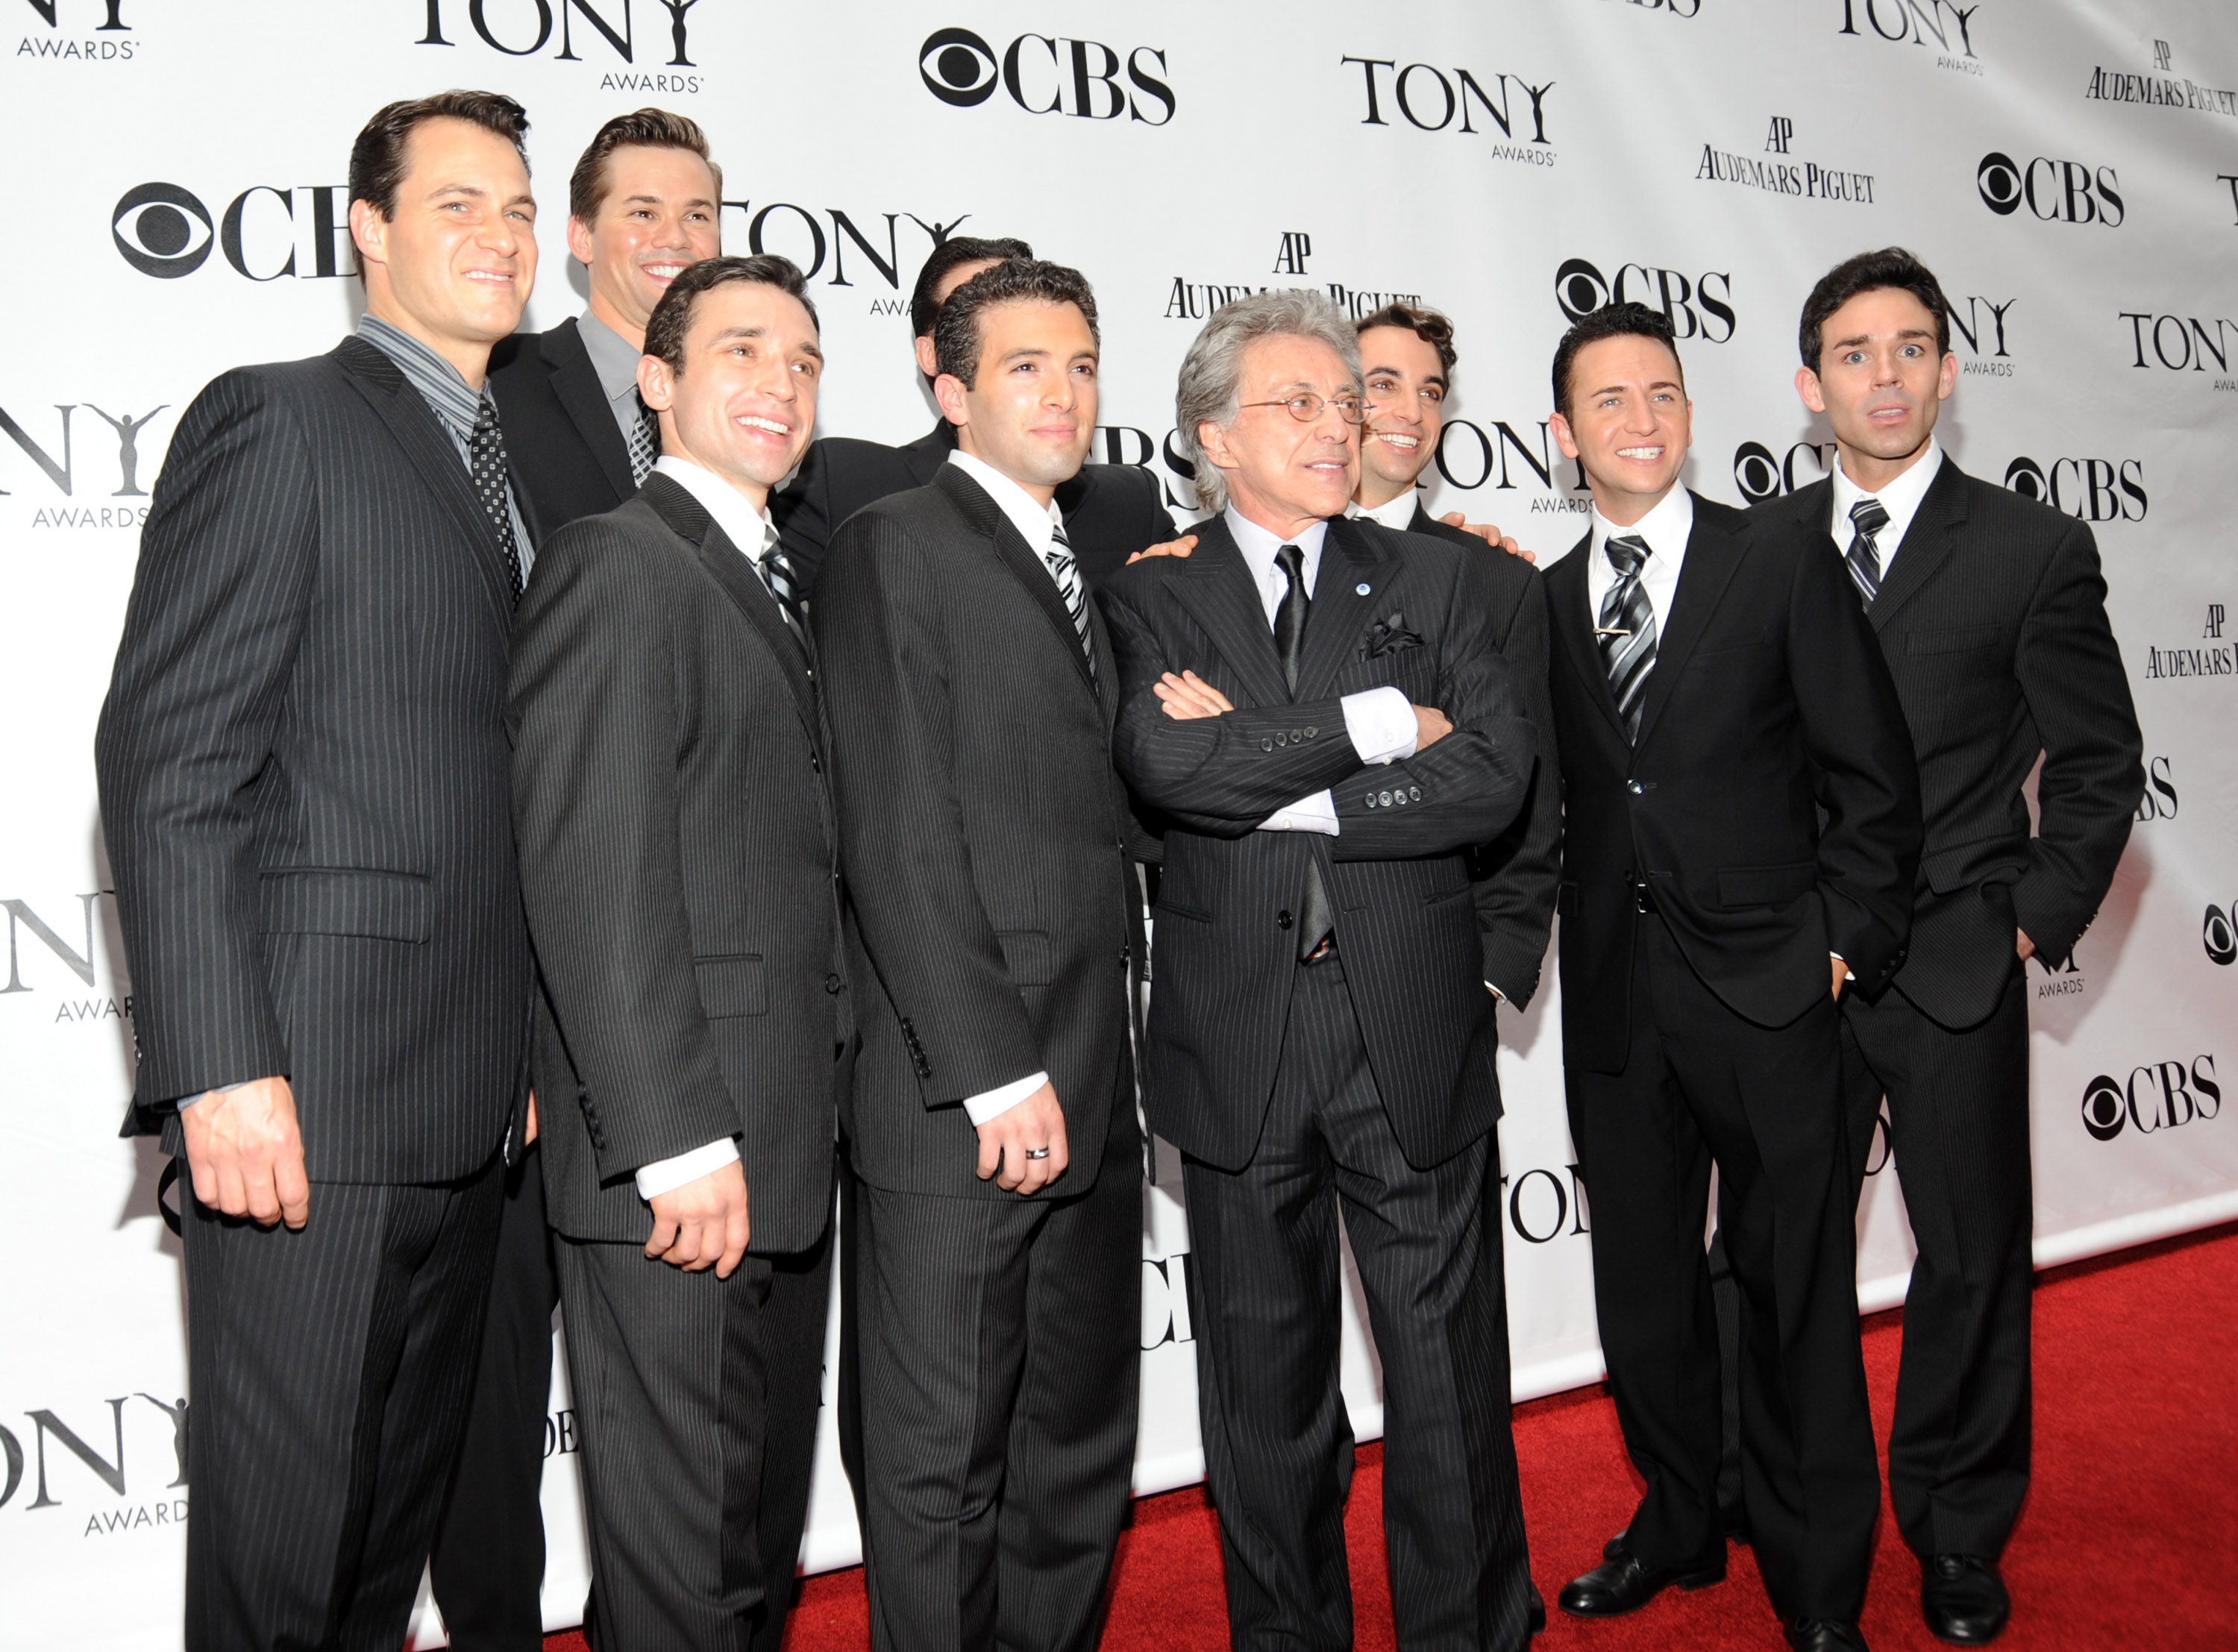 Jarrod Spector with Frankie Valli and Andrew Rannells at the 63rd Annual Tony Awards